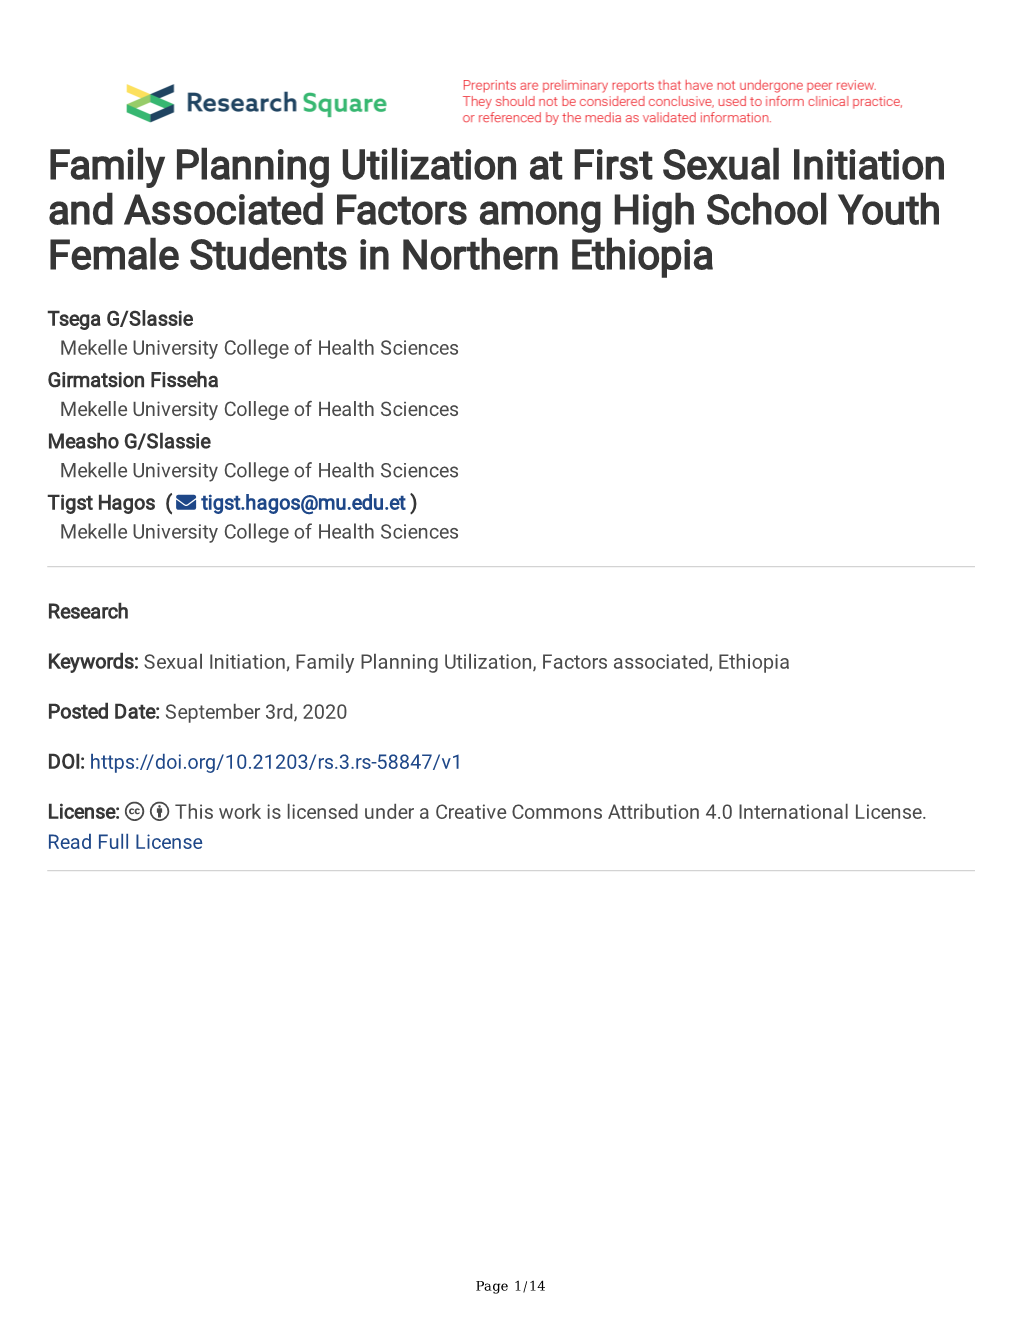 Family Planning Utilization at First Sexual Initiation and Associated Factors Among High School Youth Female Students in Northern Ethiopia